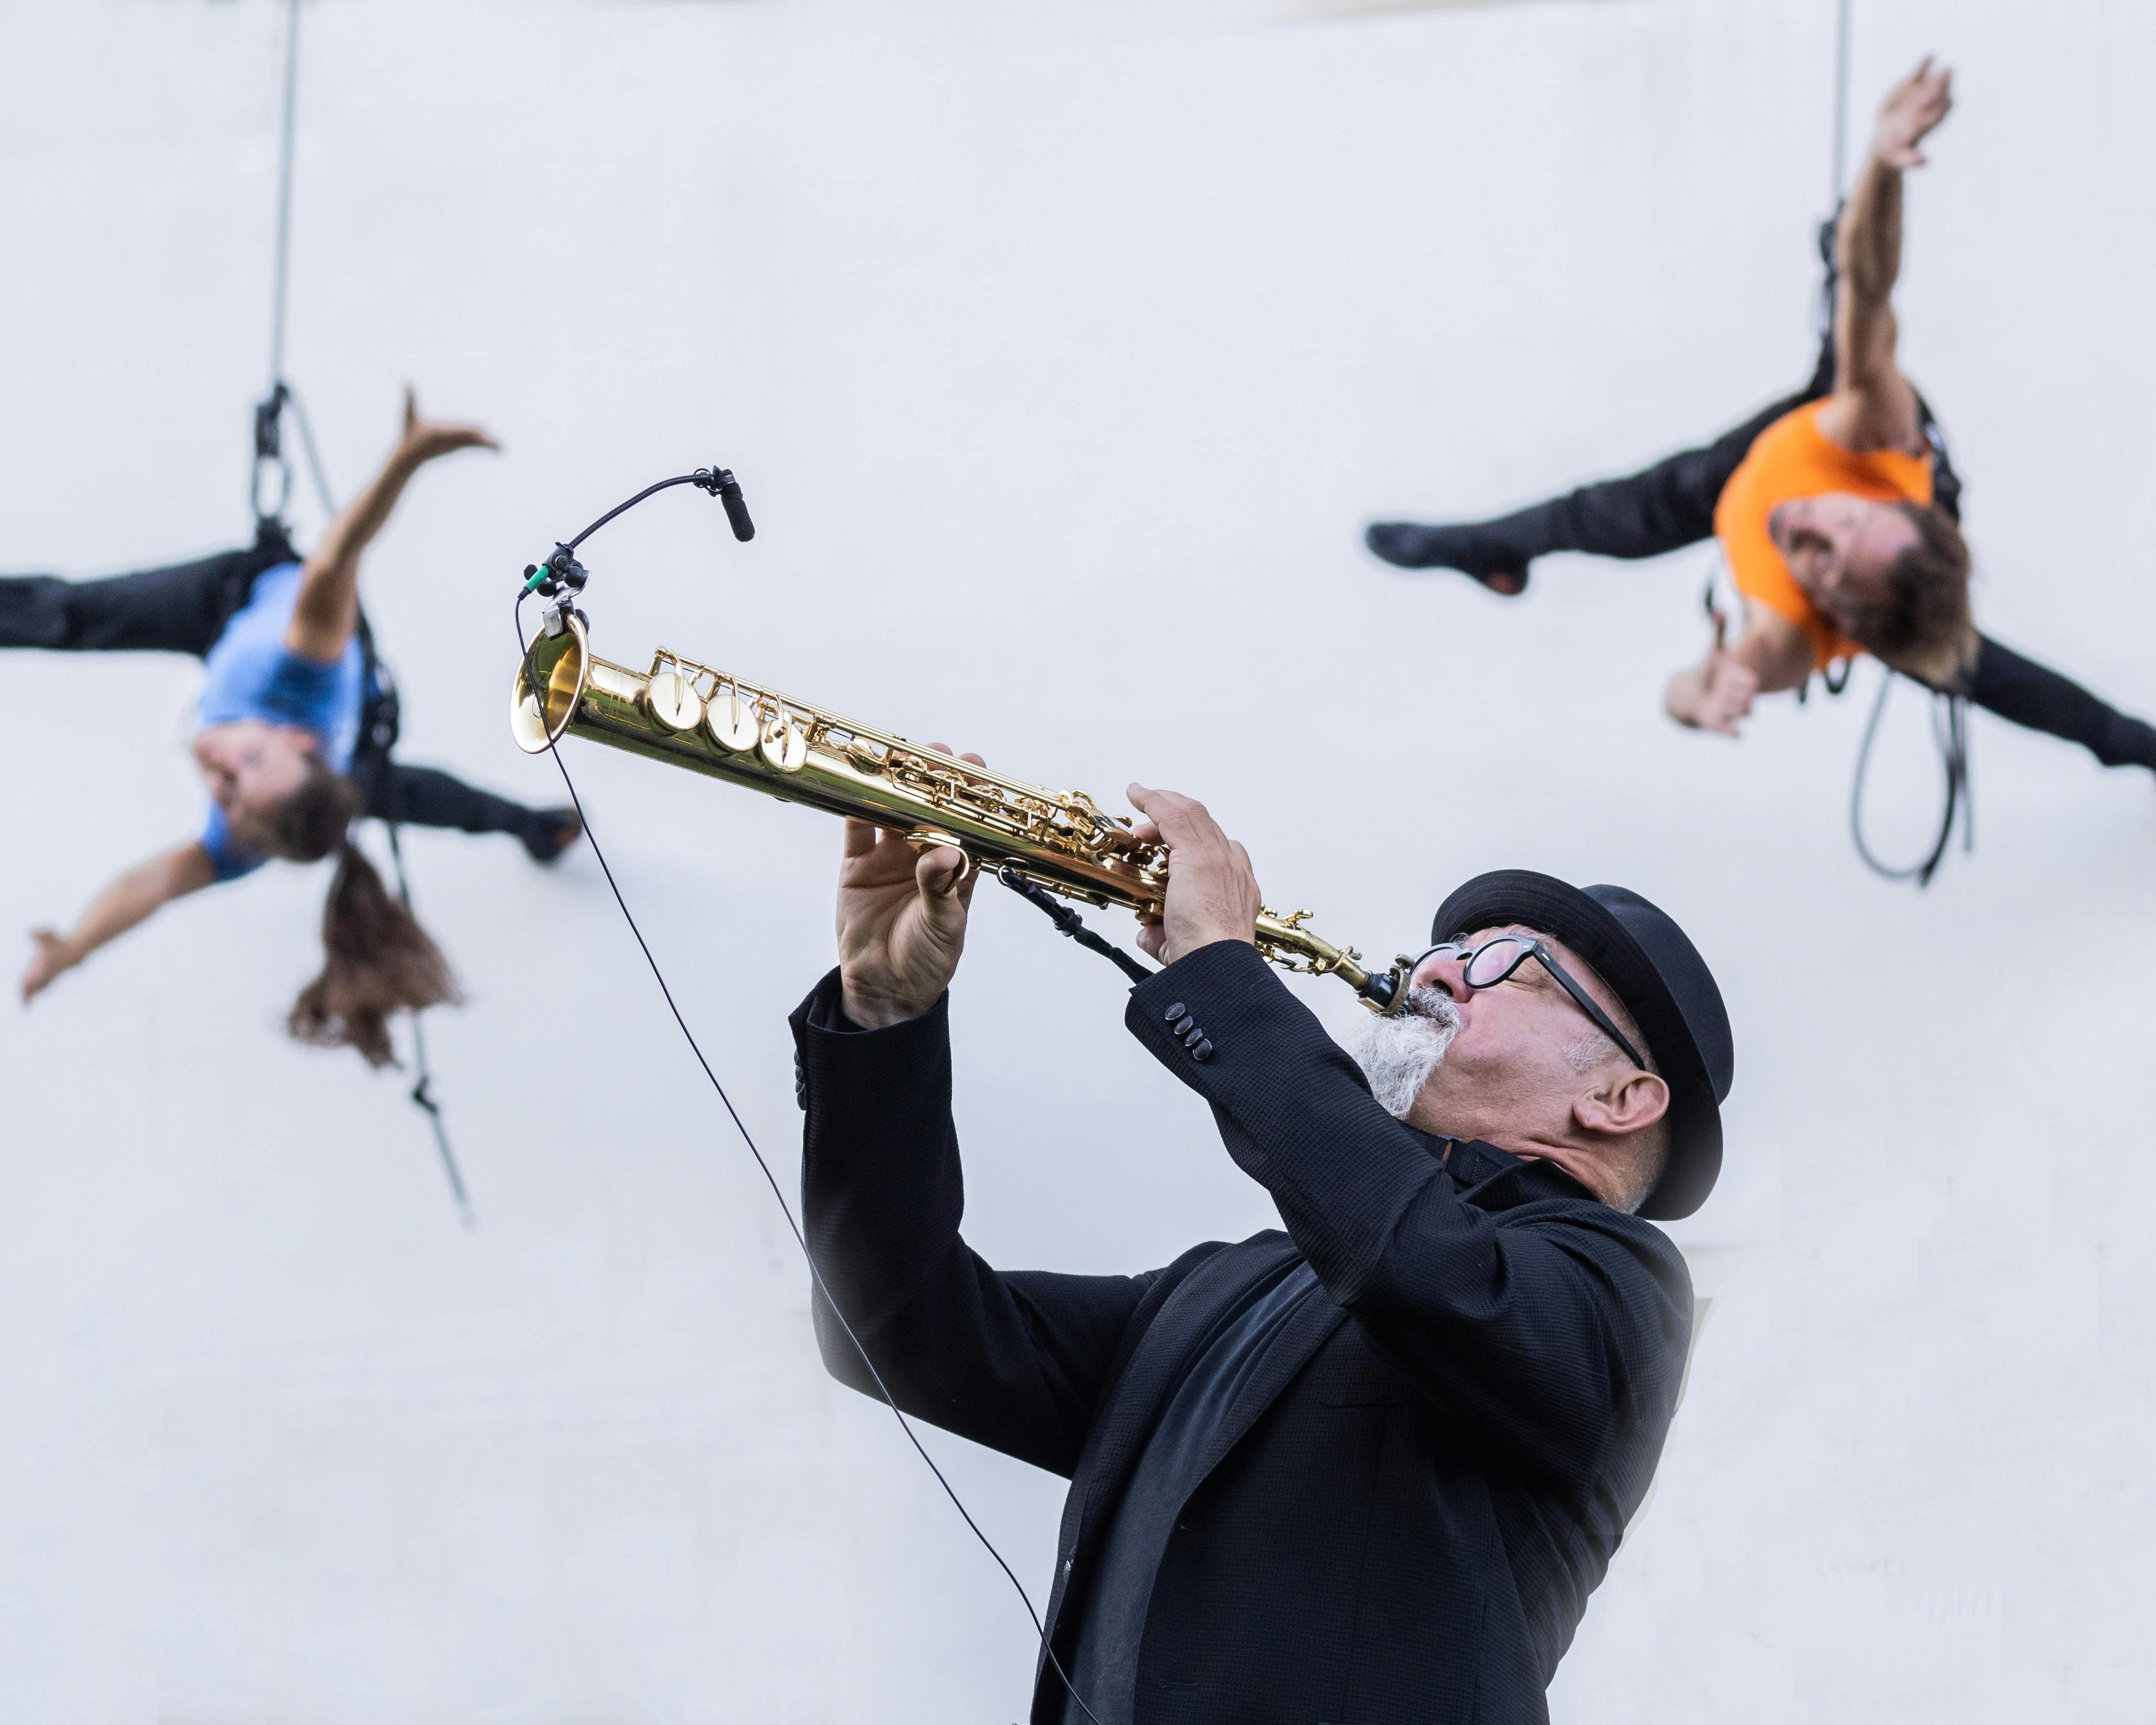 In the foreground a musician plays a trumpet. He is wearing a jacket, a bowler hat and black spectacles. In the background, two performers dance harnessed on a grey wall, a man in an orange T-shirt and a woman with long hair pulled back in a ponytail and a blue T-shirt.